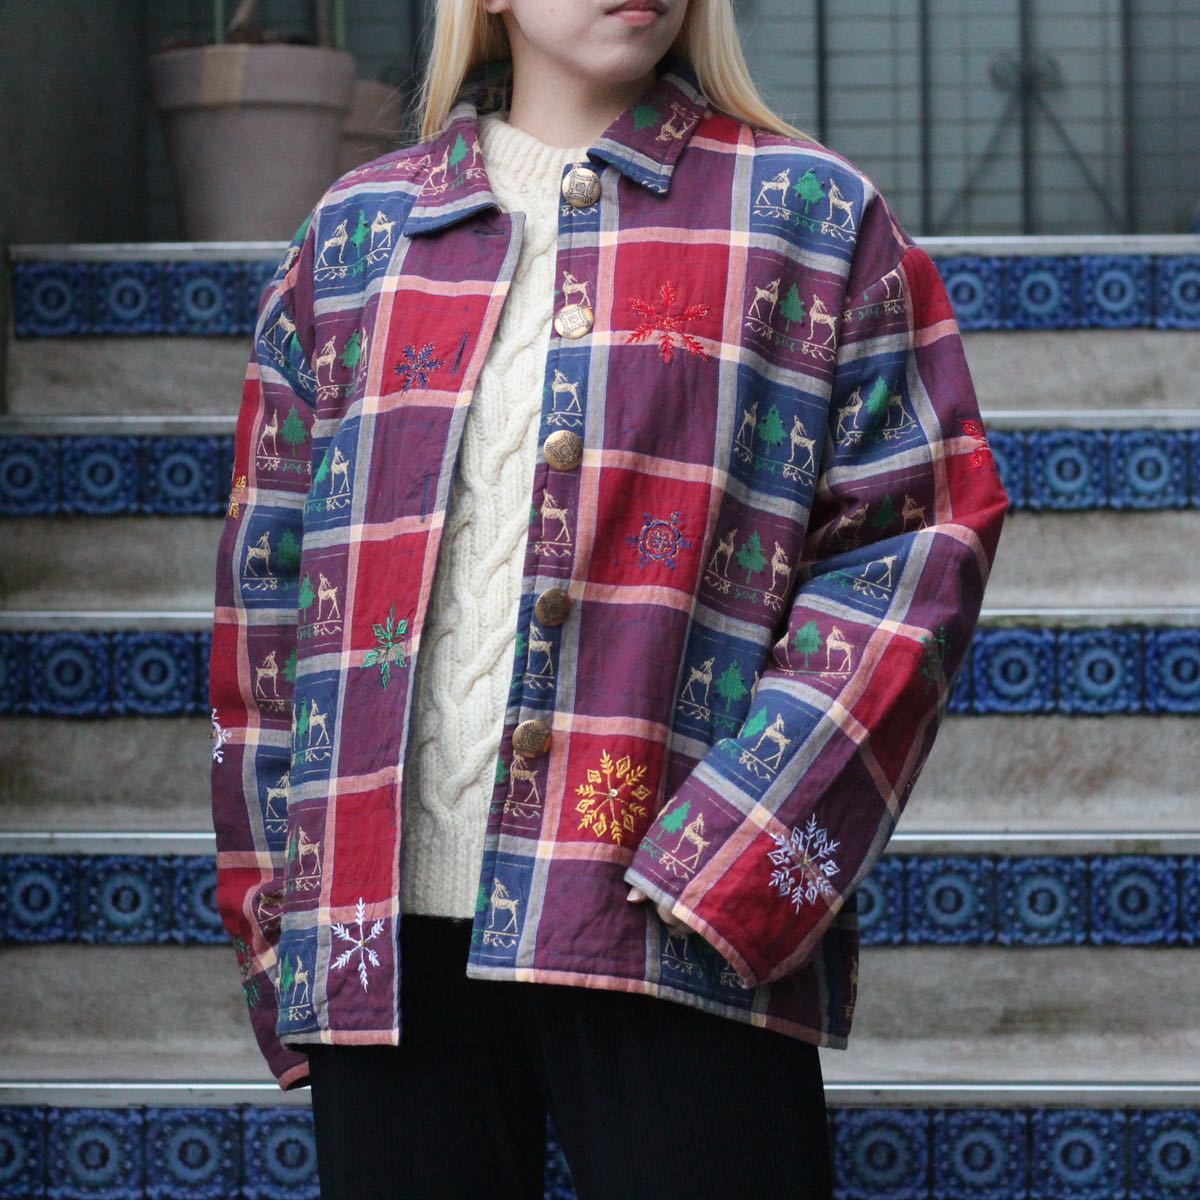 USA VINTAGE new Direction CHECK PATTERNED EMBROIDERY DESIGN JACKET/アメリカ古着チェック柄刺繍デザインジャケット_画像1